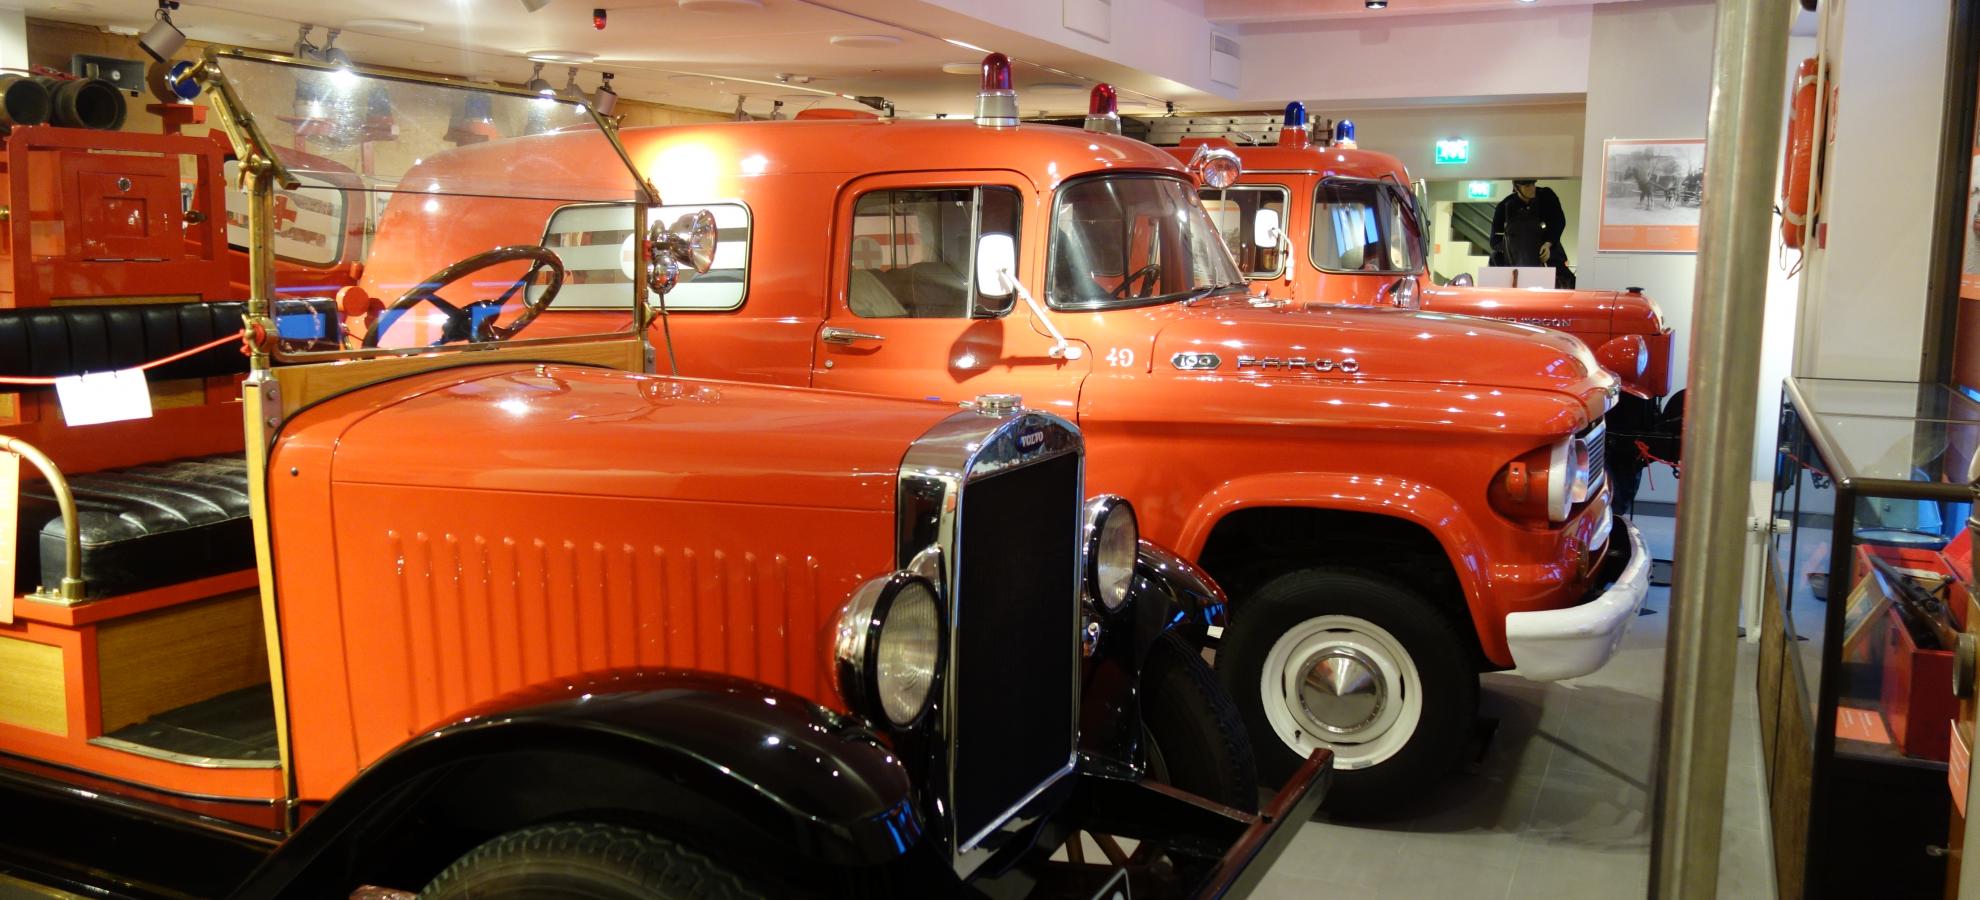 Inside one of the large exhibition spaces of Helsinki City Rescue Department's Fire Museum, a row of three old, orange service cars and vans from different ages stand in a row leading away from the camera, almost filling the photo.